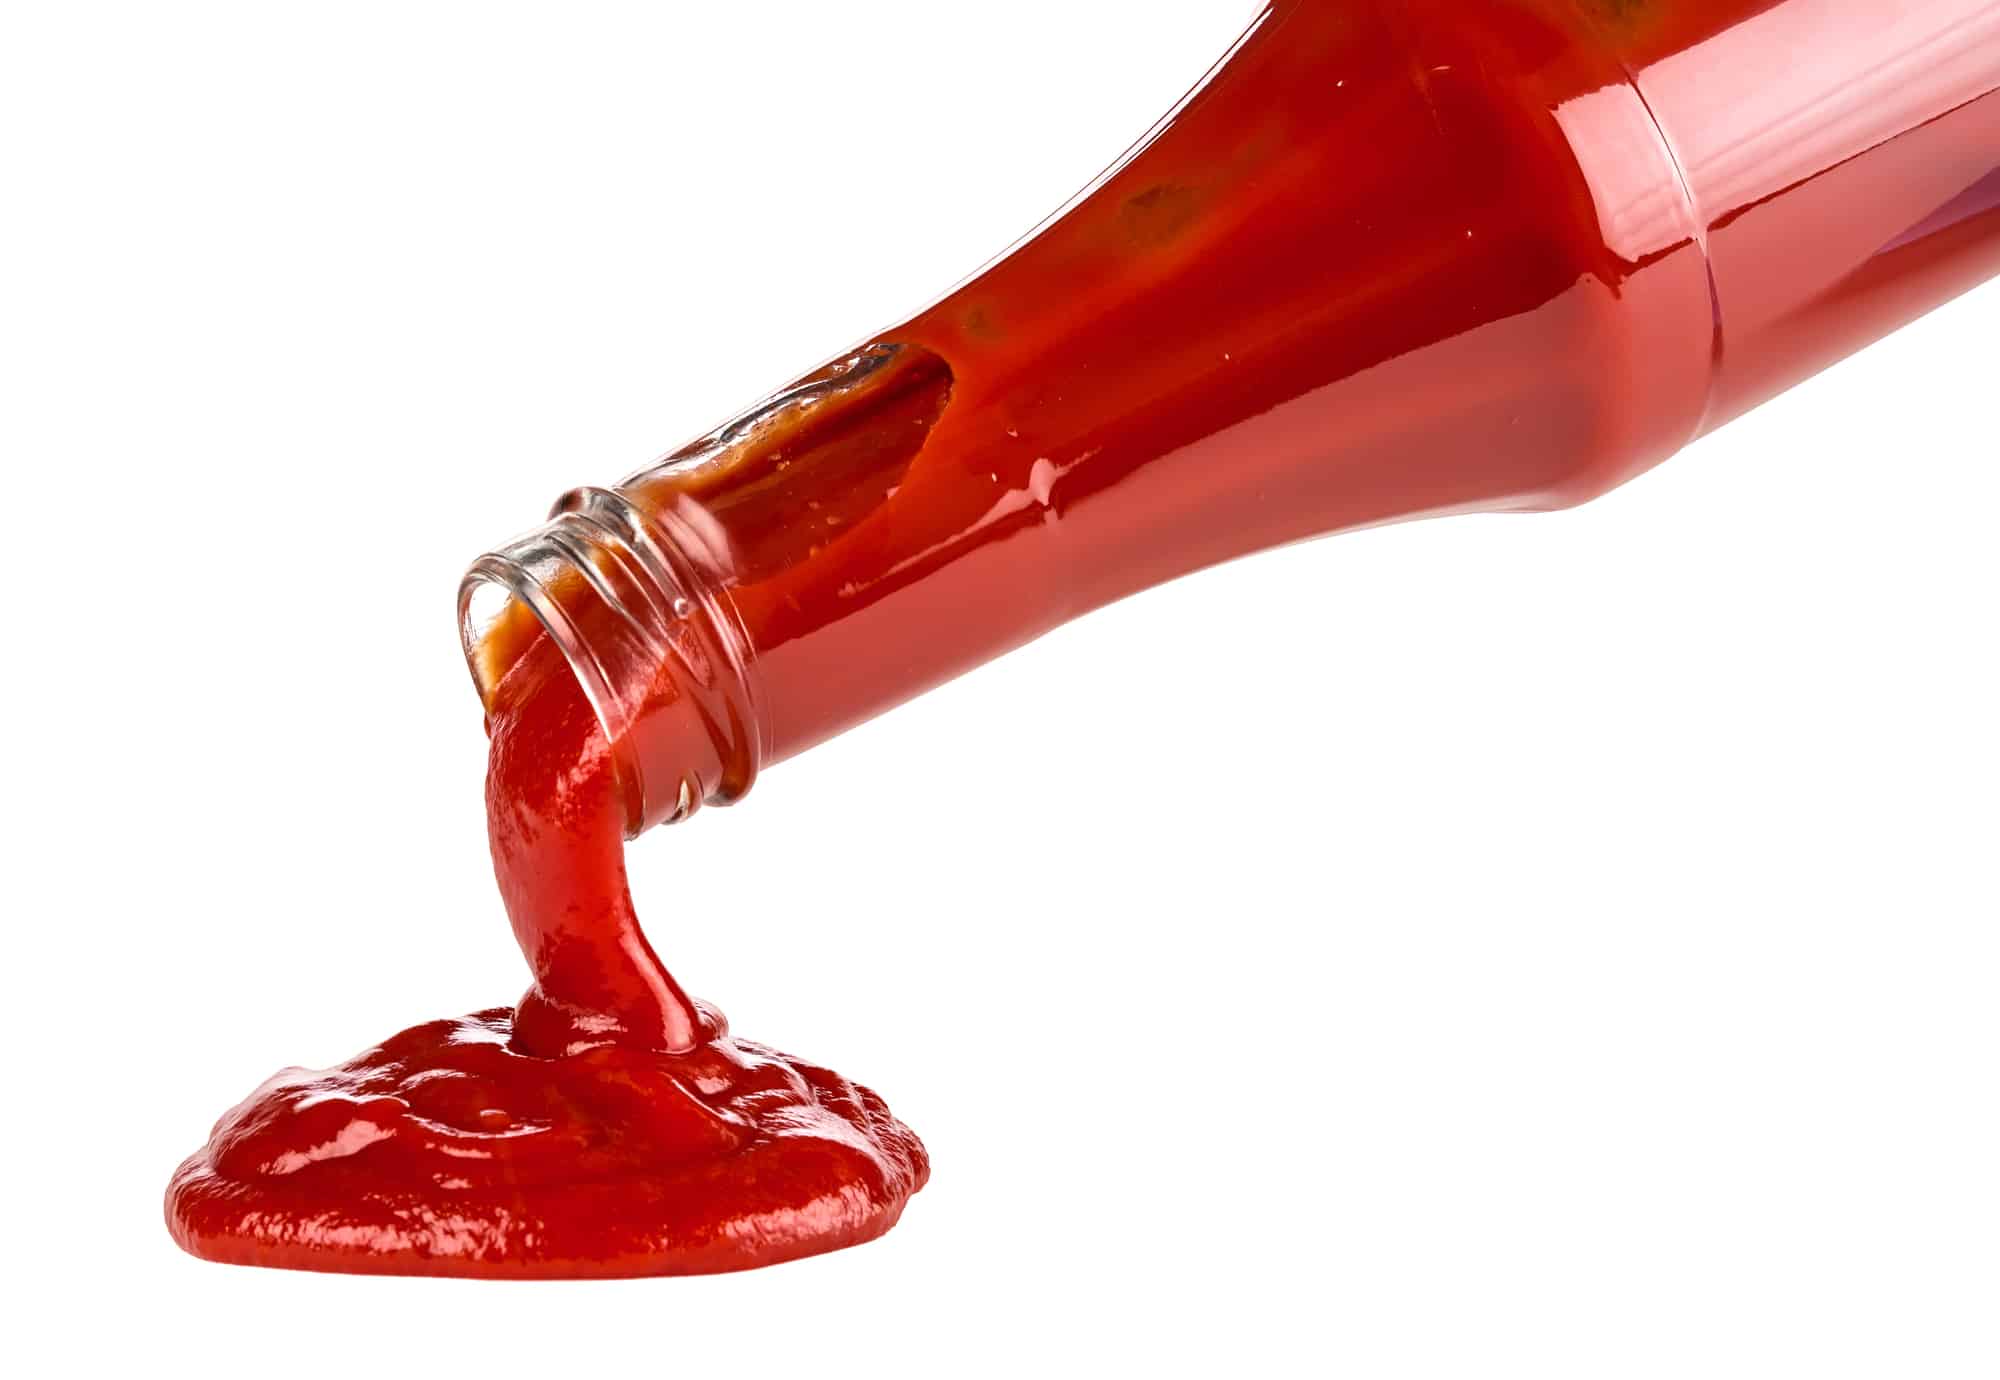 Ketchup pouring out on table